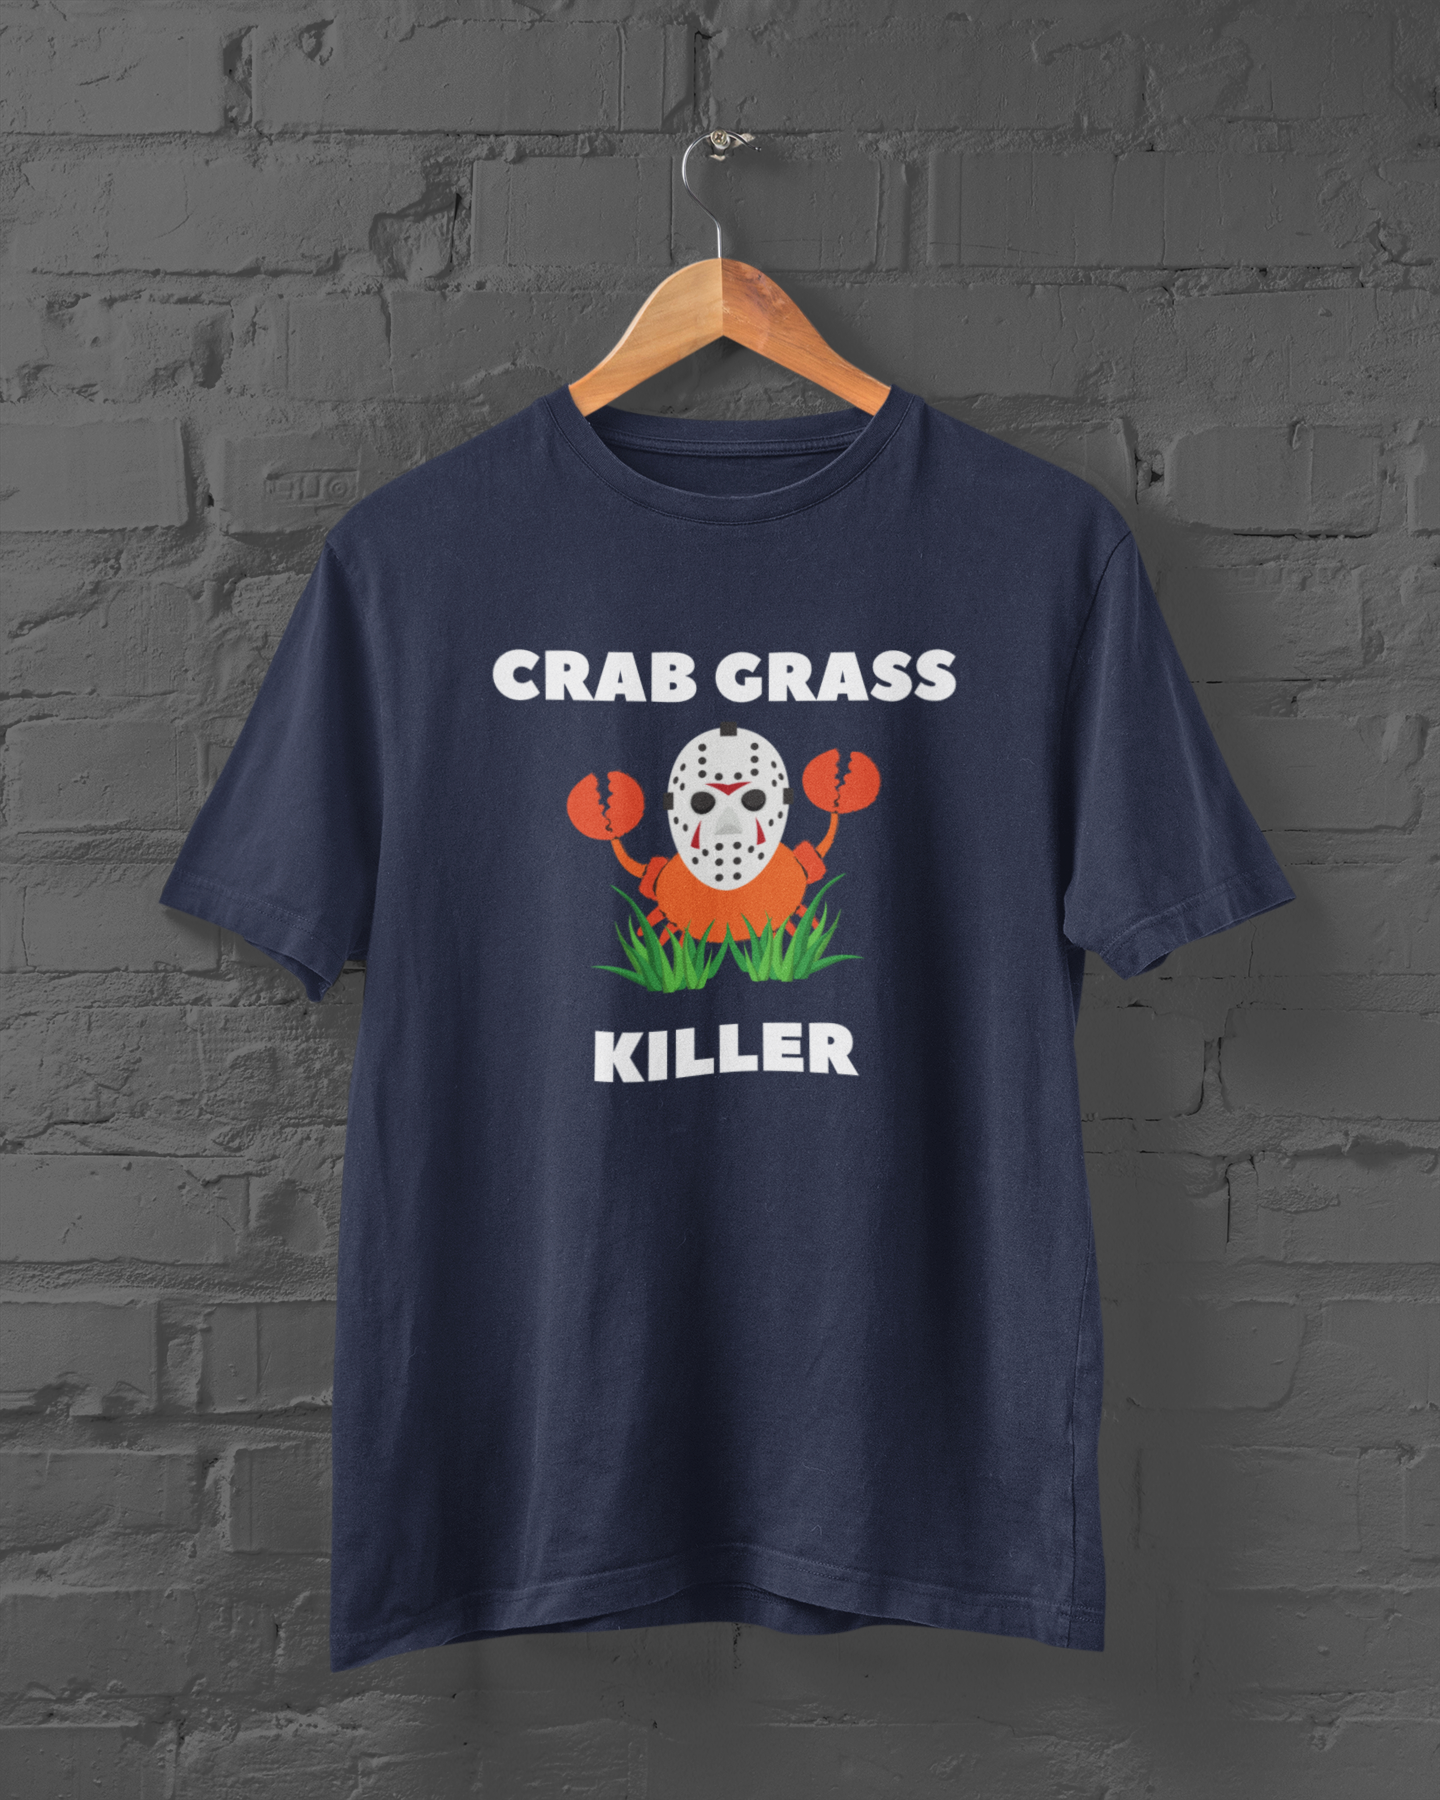 Crab grass avengers unite!   This t-shirt is everything you've dreamed of and more. It feels soft and lightweight, with the right amount of stretch. It's comfortable and flattering for all.